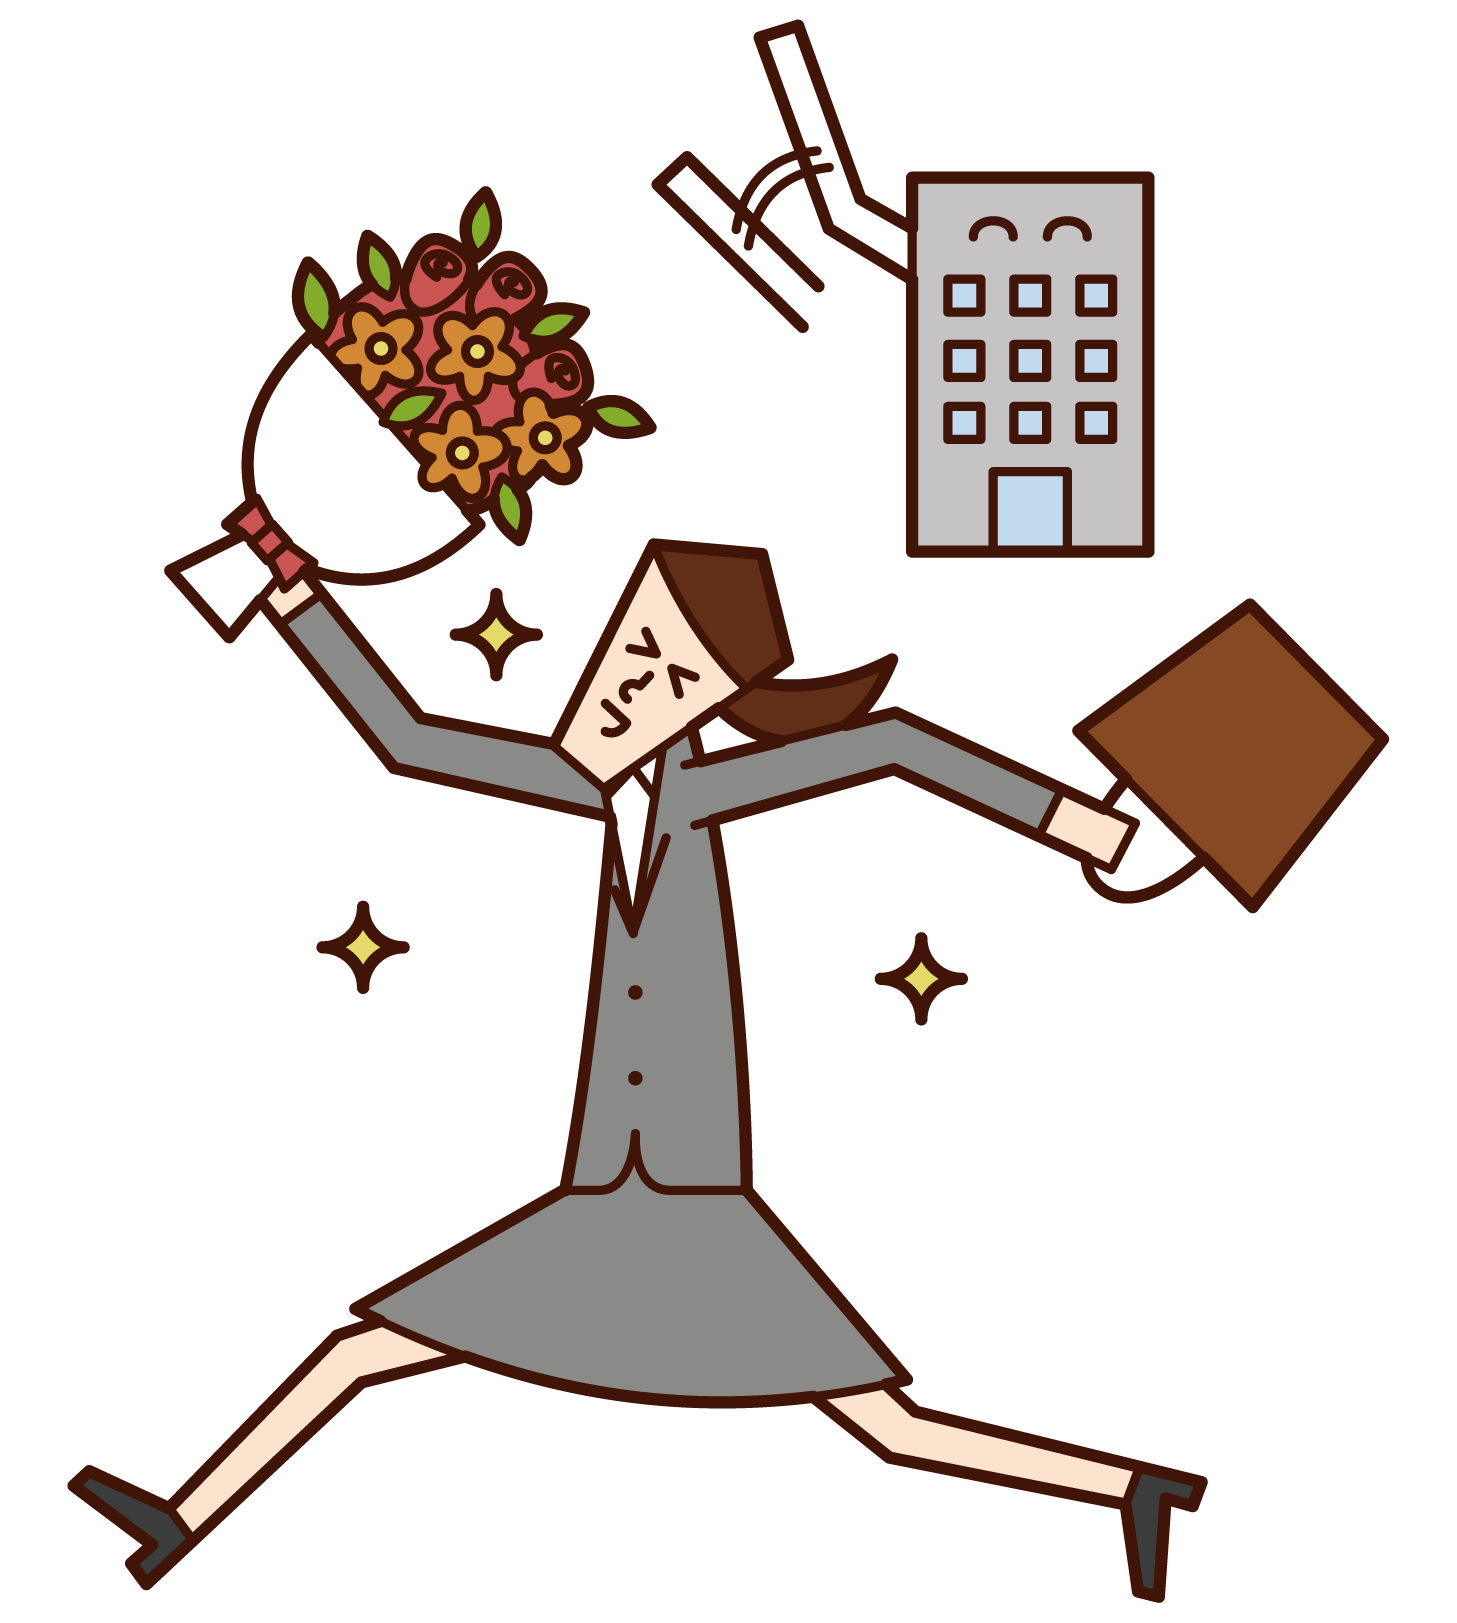 Illustration of a woman who leaves the company or leaves the company